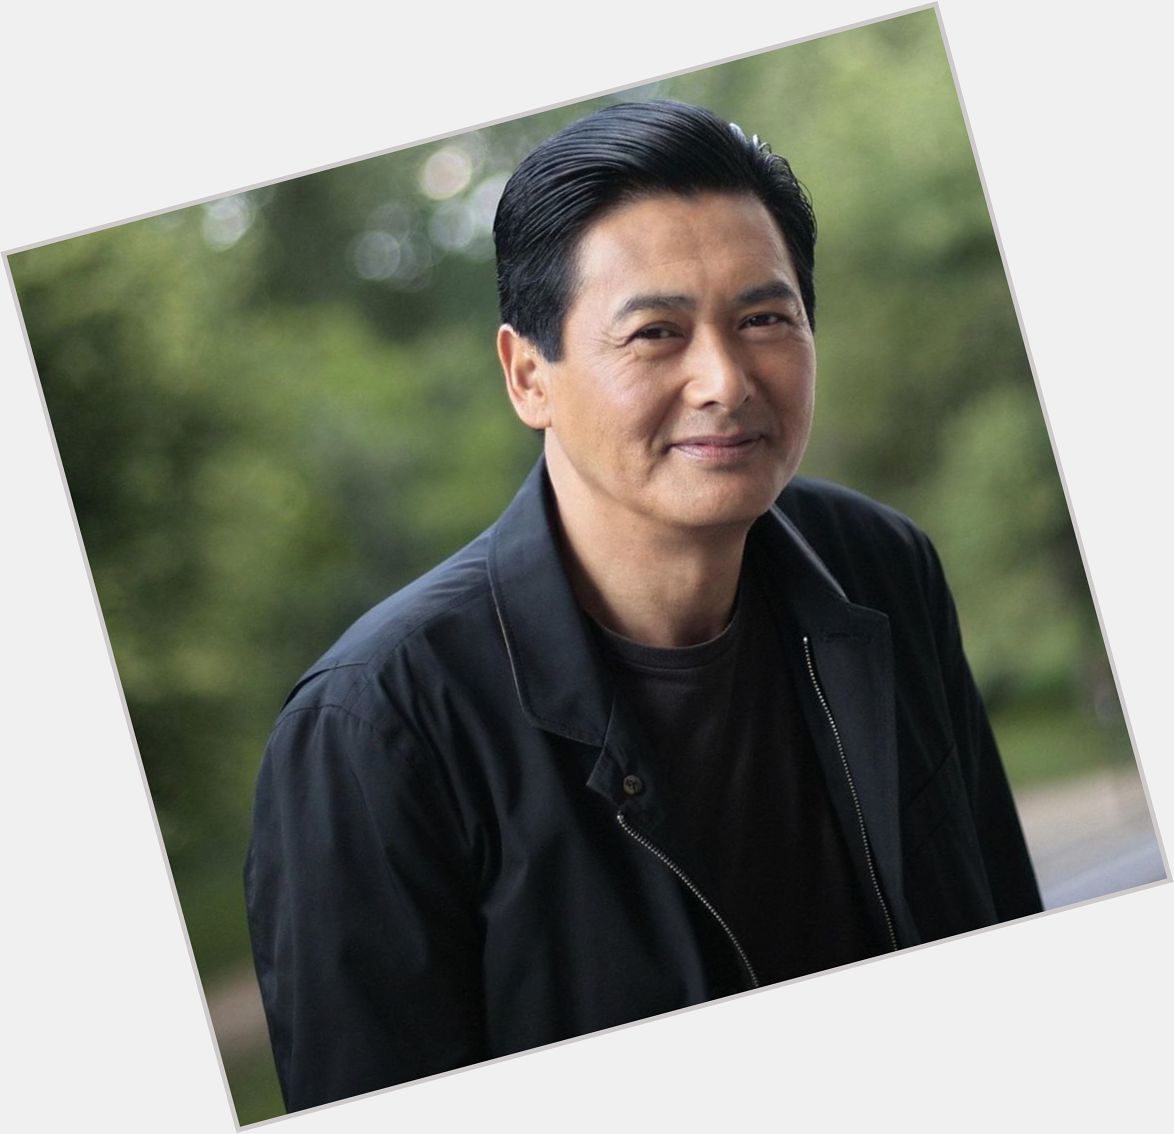 Happy Birthday to Chow Yun Fat who turns 65 today! 